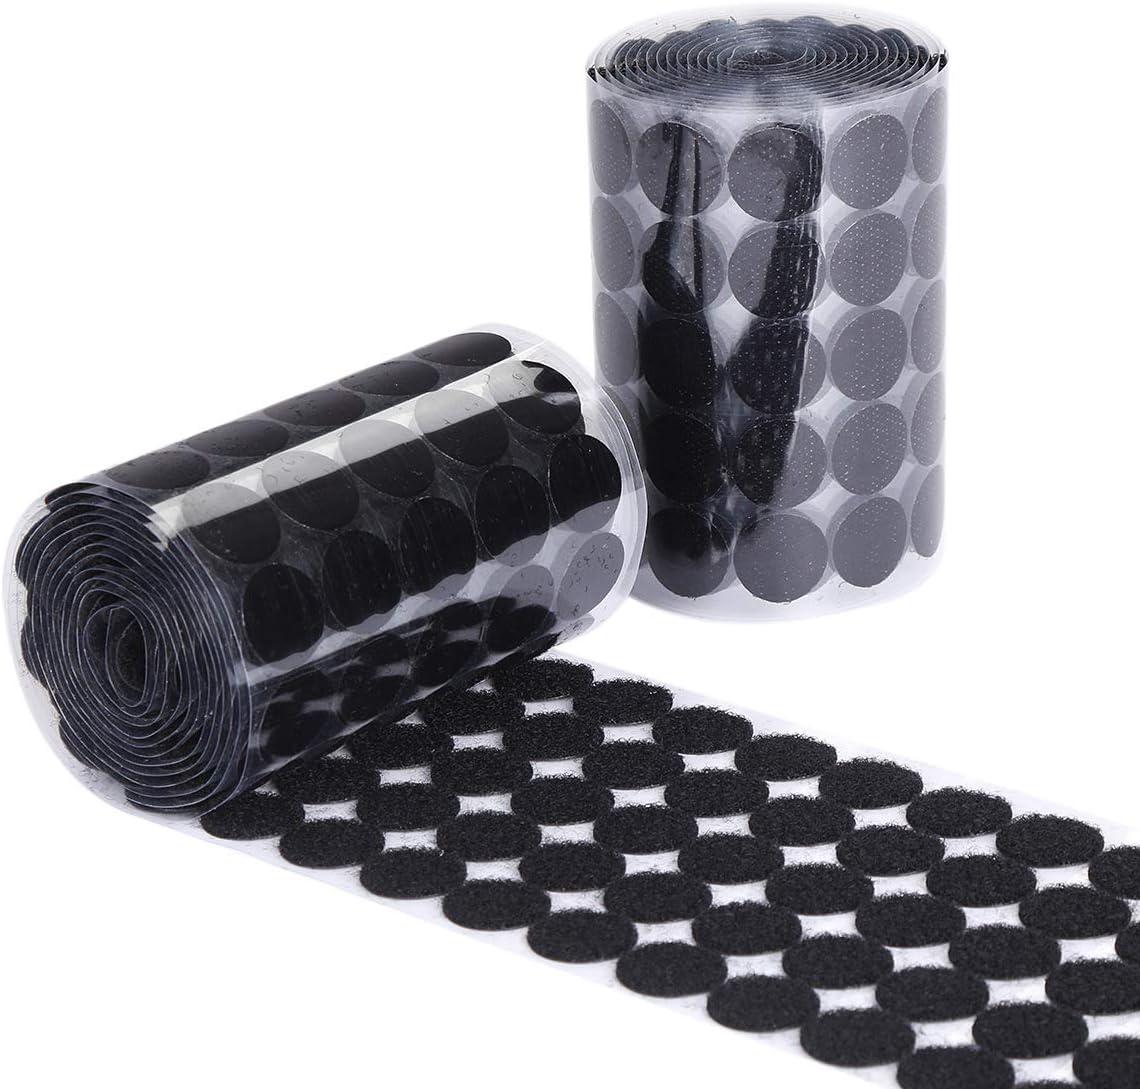 sticky back coins black self adhesive dots 1000pcs 500 pairs 3/5 diameter hook and loop dots taps perfect for